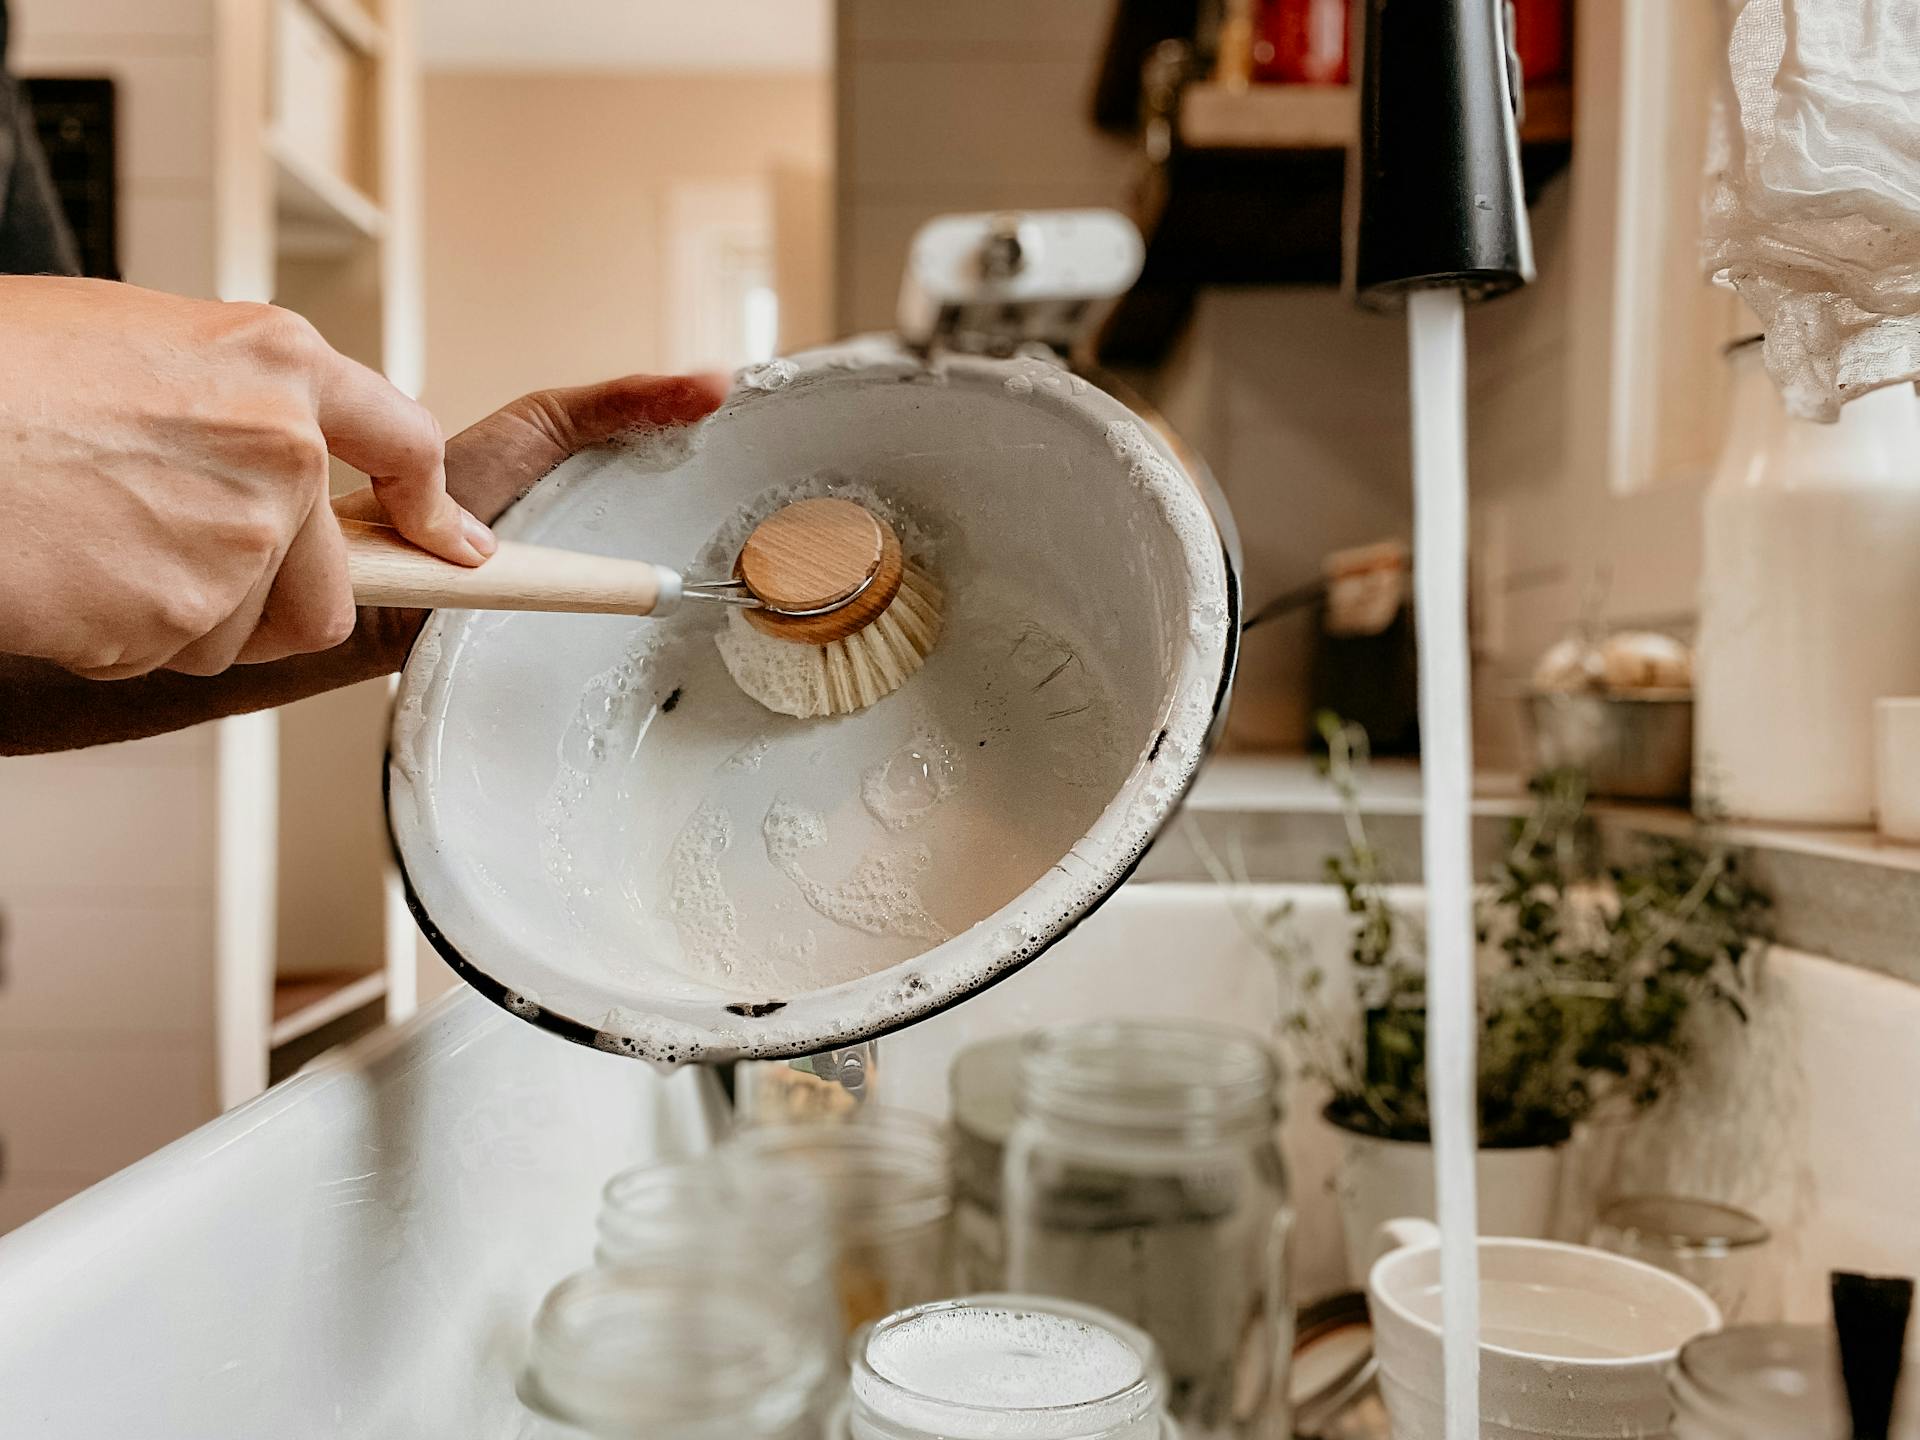 A person washing dishes | Source: Pexels